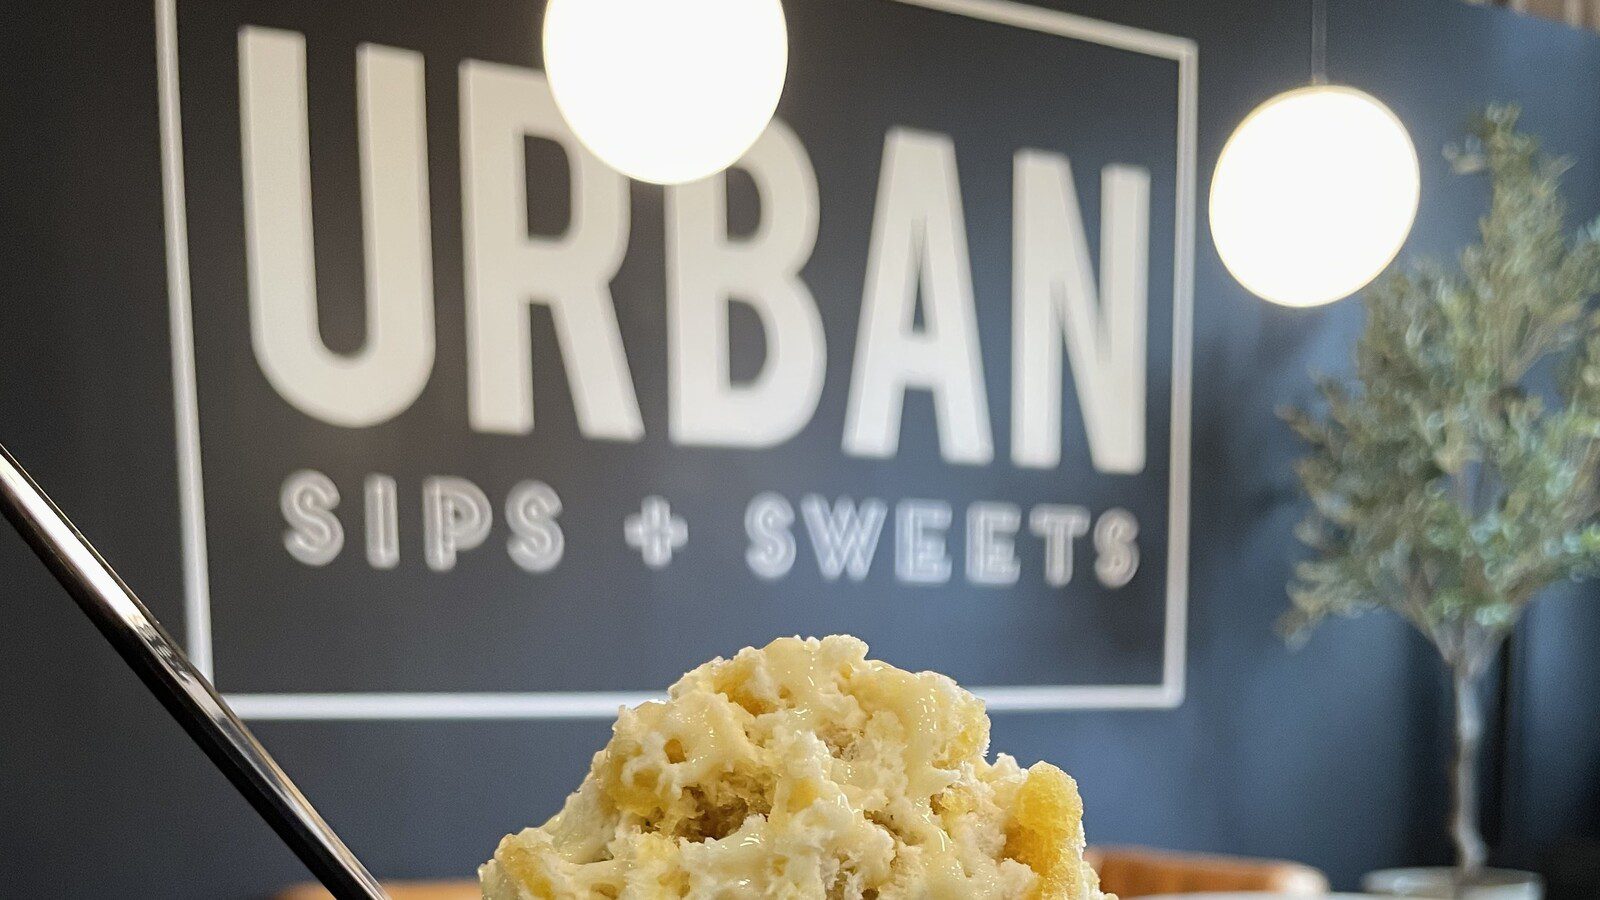 Urban Sips + Sweets in Downtown Franklin.